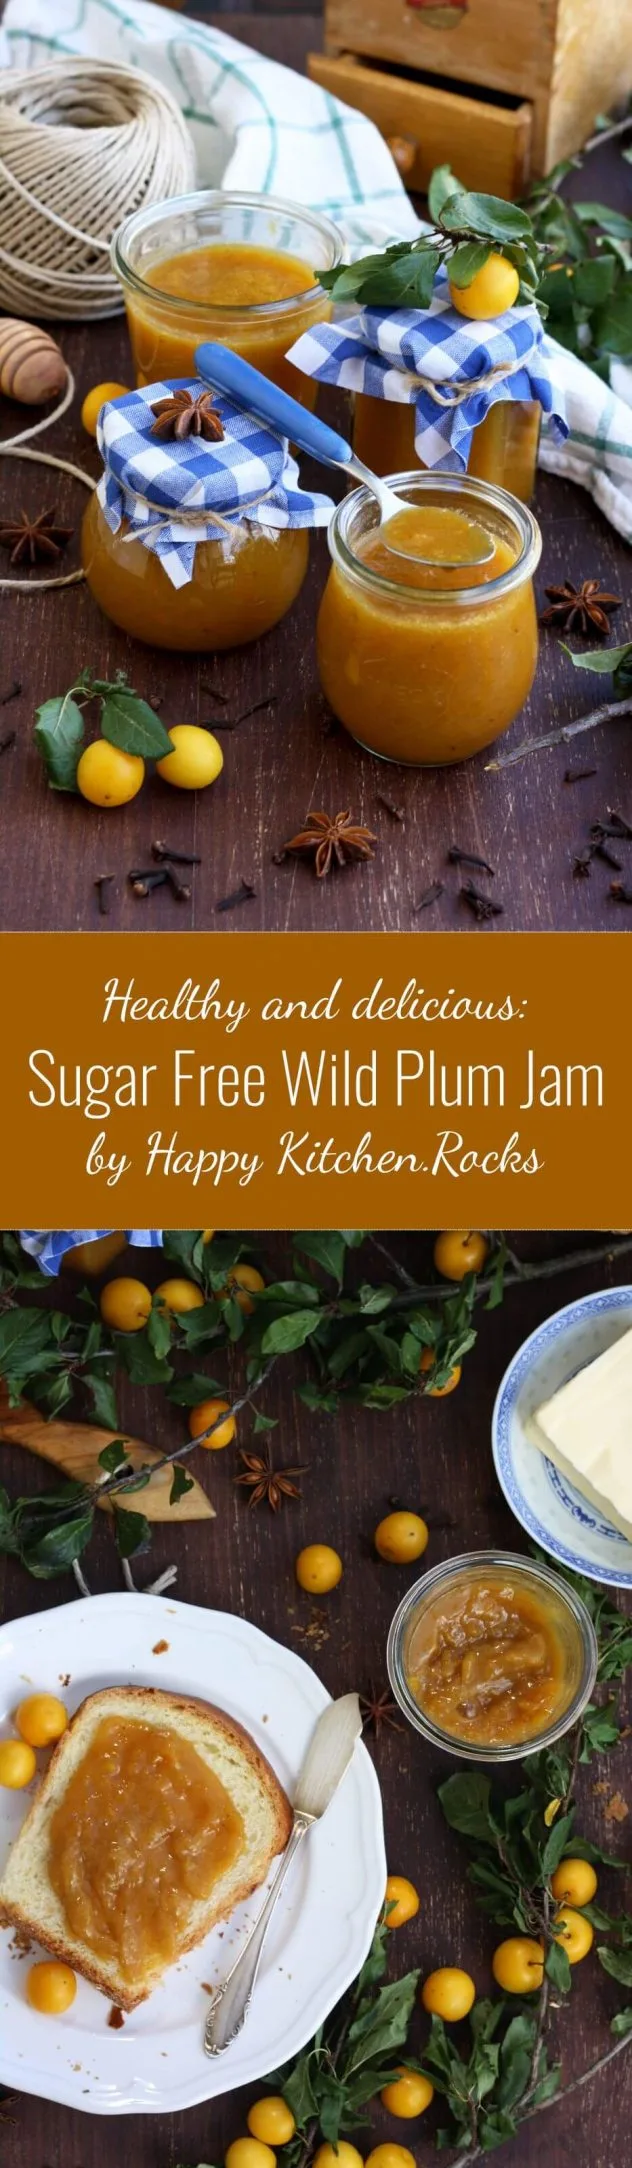 This sugar free wild plum jam is sweetened with a bit of honey and spiced with cloves and anise. Easy and delicious step-by-step recipe.